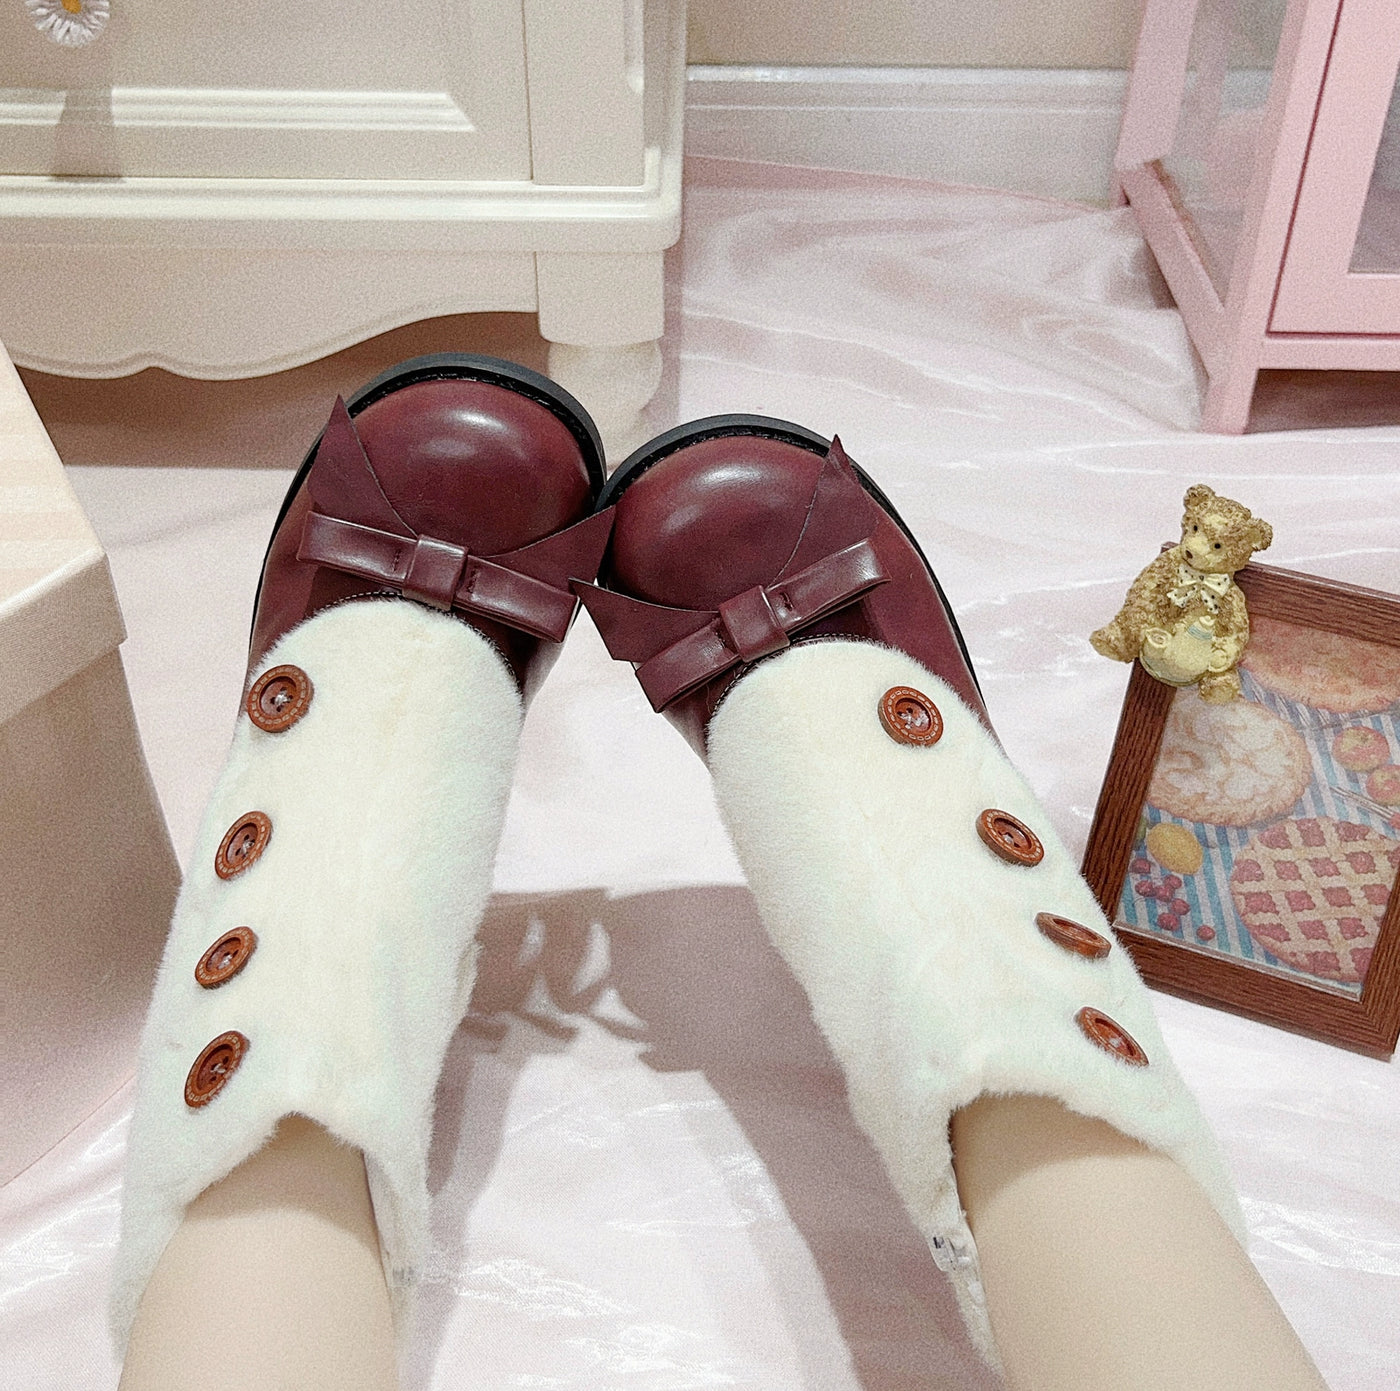 Dolly Doll~Winter Lolita Boots Fur Mary Jane Lolita Low Heel Shoes 34 4cm-Dark Red 